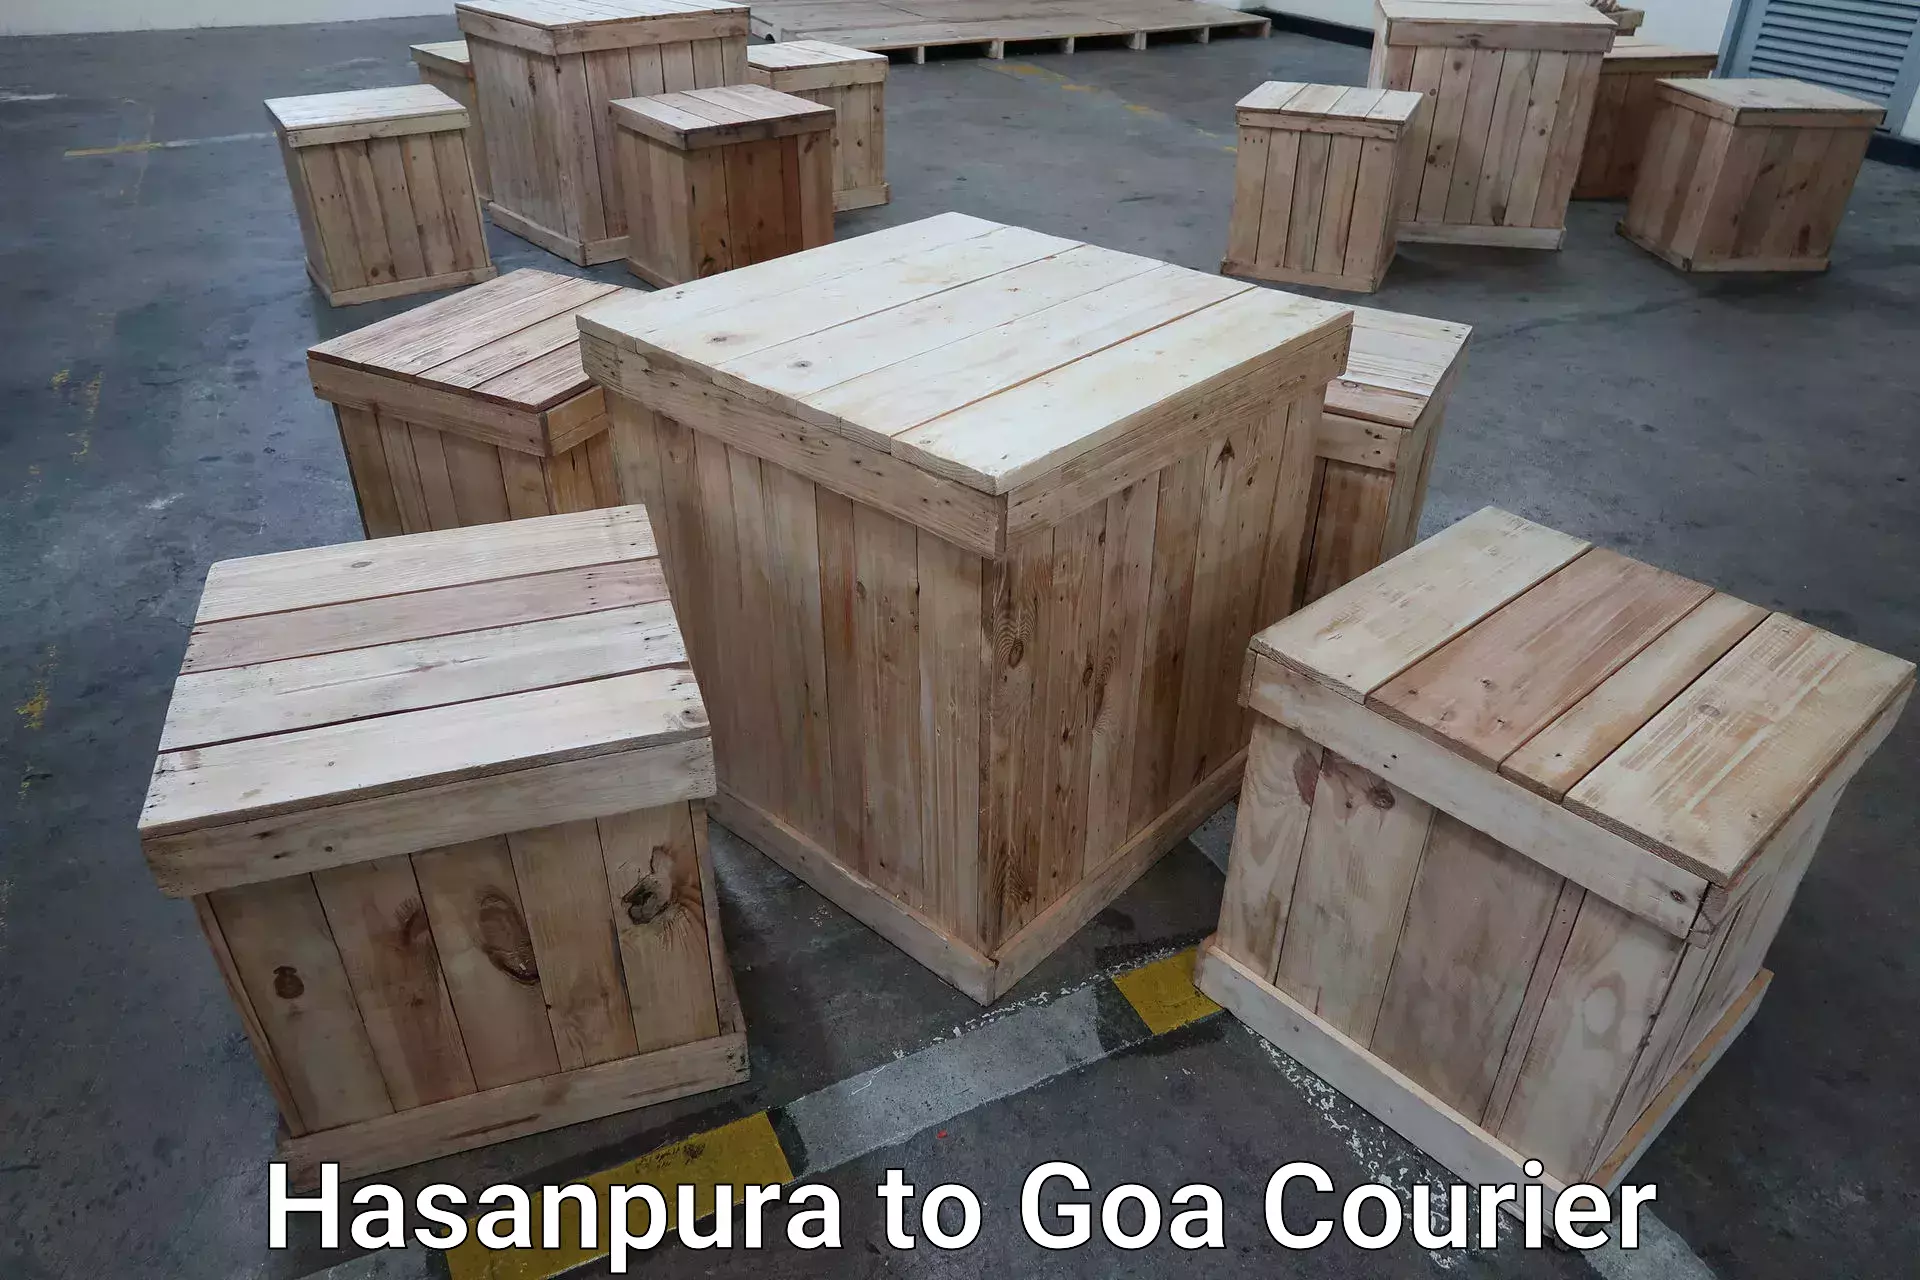 Luggage delivery system Hasanpura to Goa